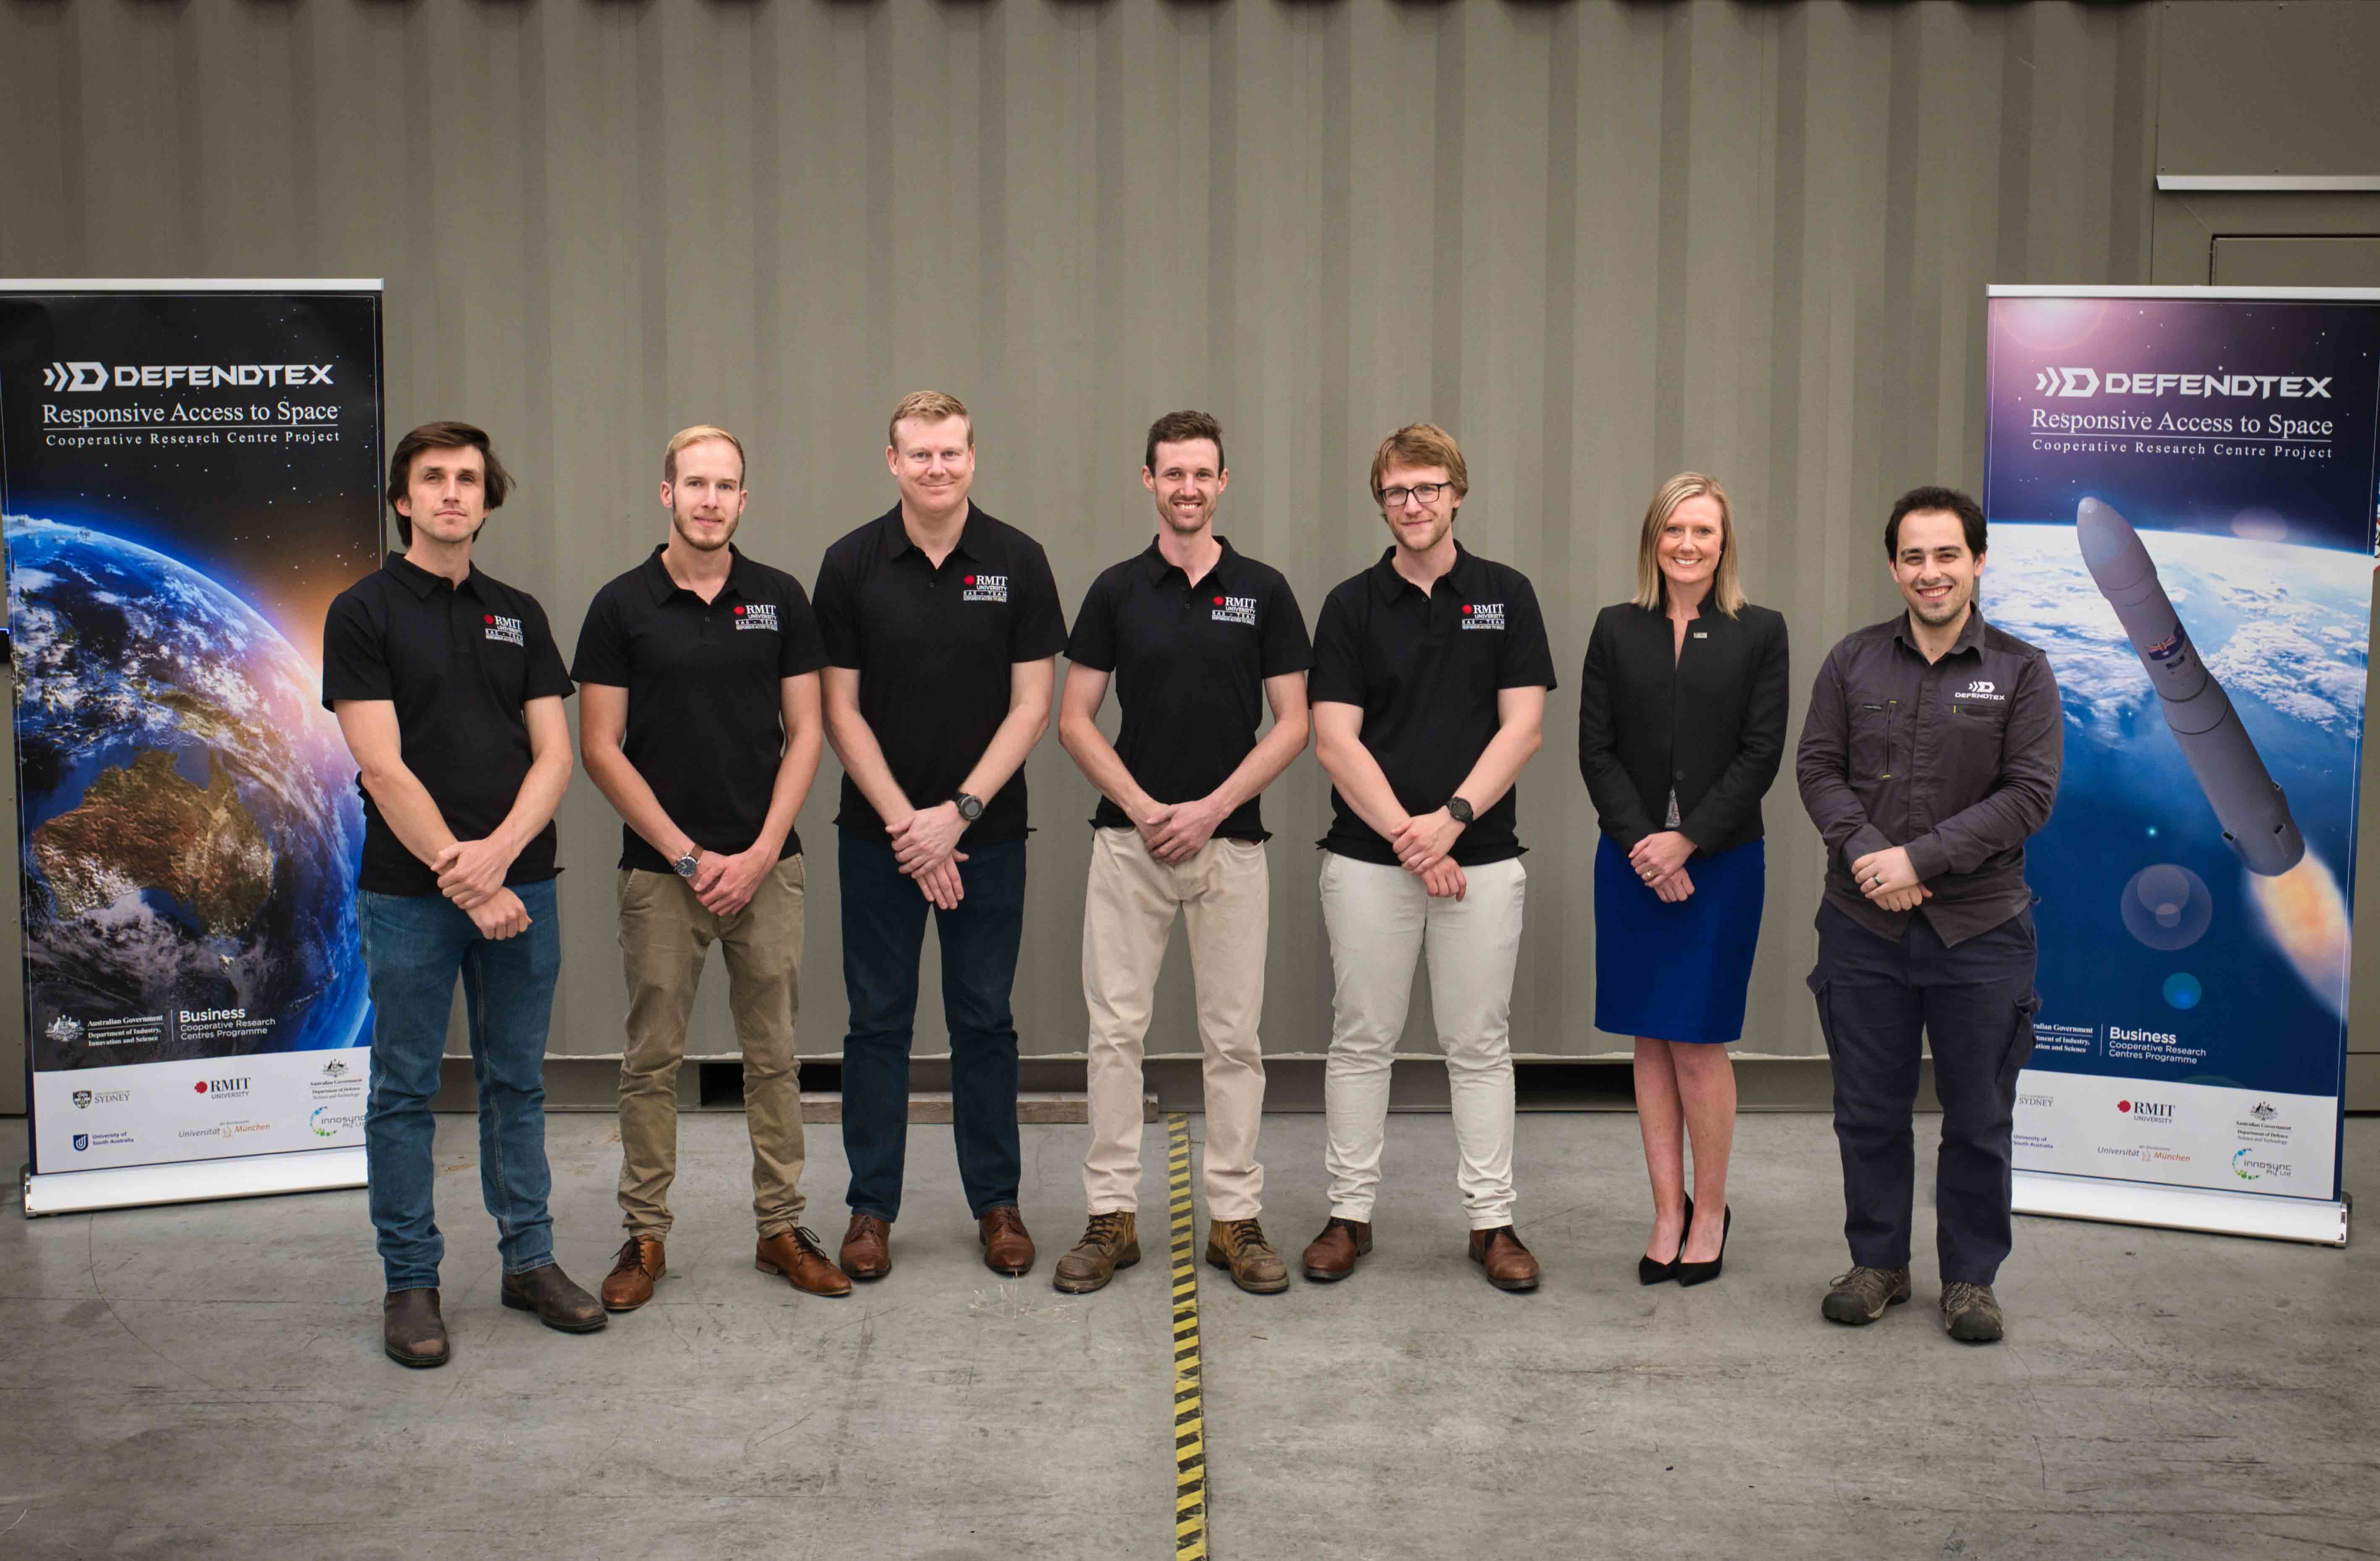 Part of the team: RMIT's Nicholas Mason-Smith, Maximilian Wenzel, Adrian Pudsey, Nathan Paull and Quentin Michalski with DefendTex's Julia O’Callaghan and Lachlan Theobald, who is also an RMIT alumnus.